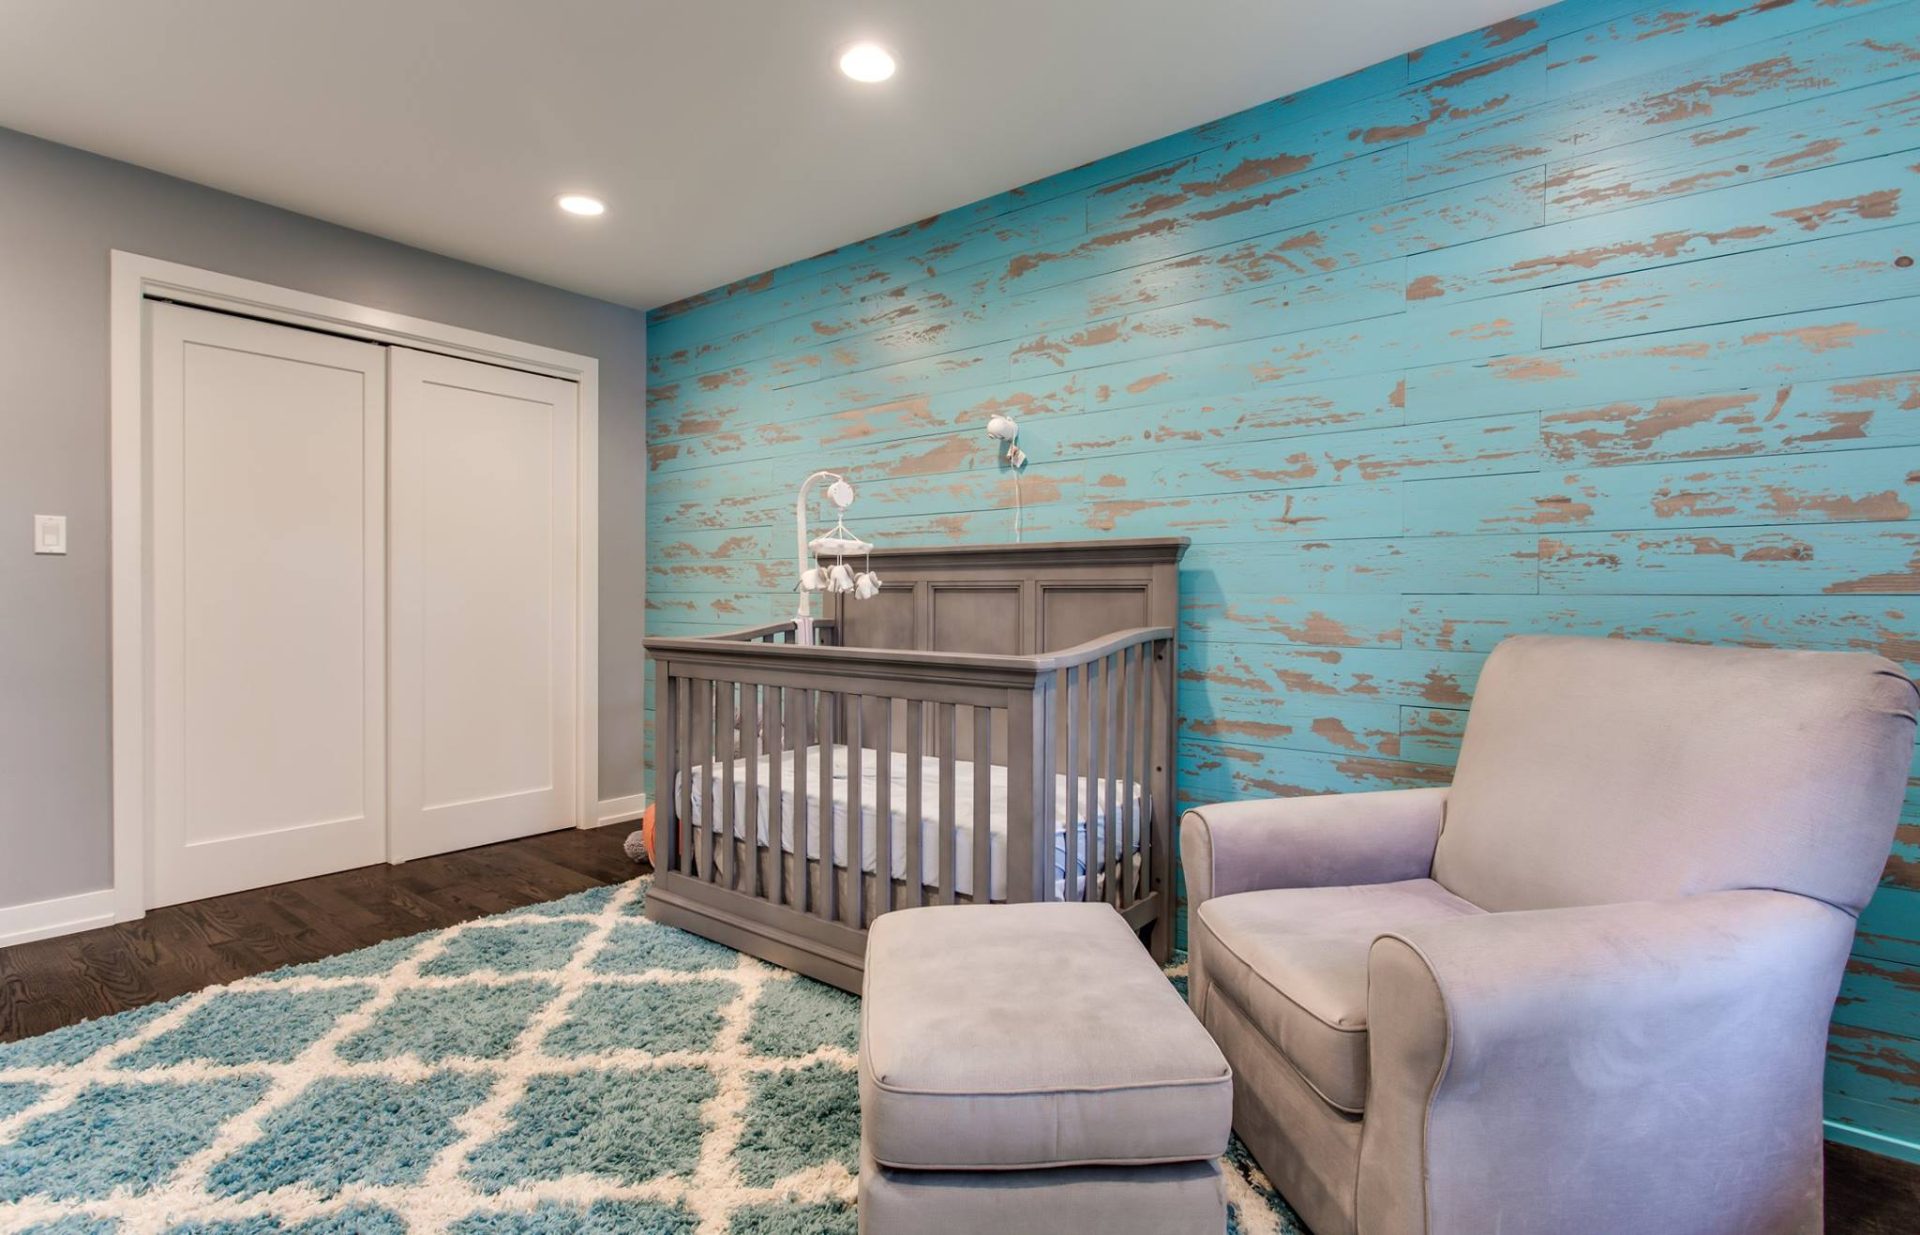 Remodeled nursery with new closet door, new windows, new flooring, and distressed blue wood shiplap decorative wall